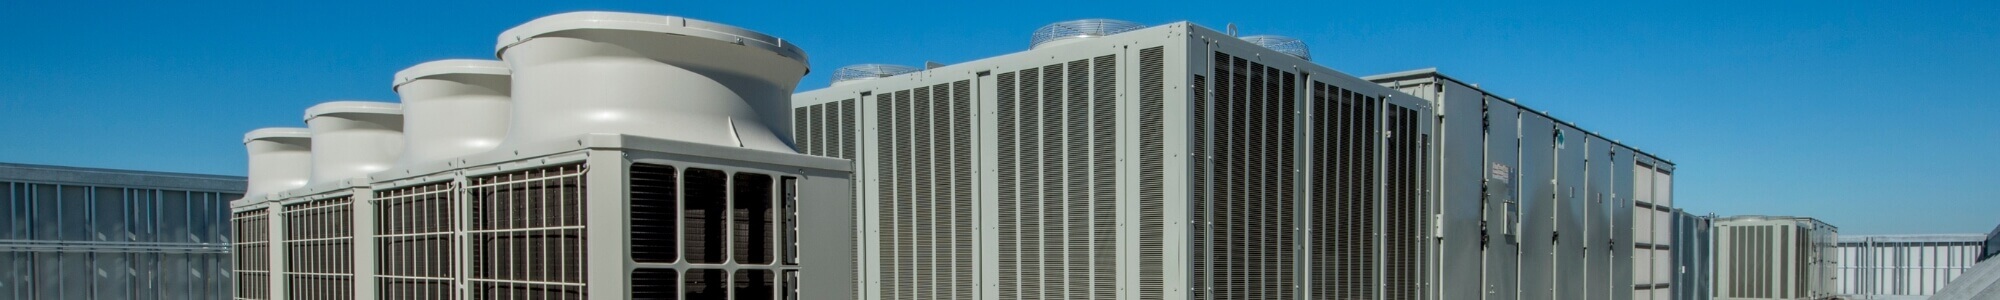 HVAC services in Angus